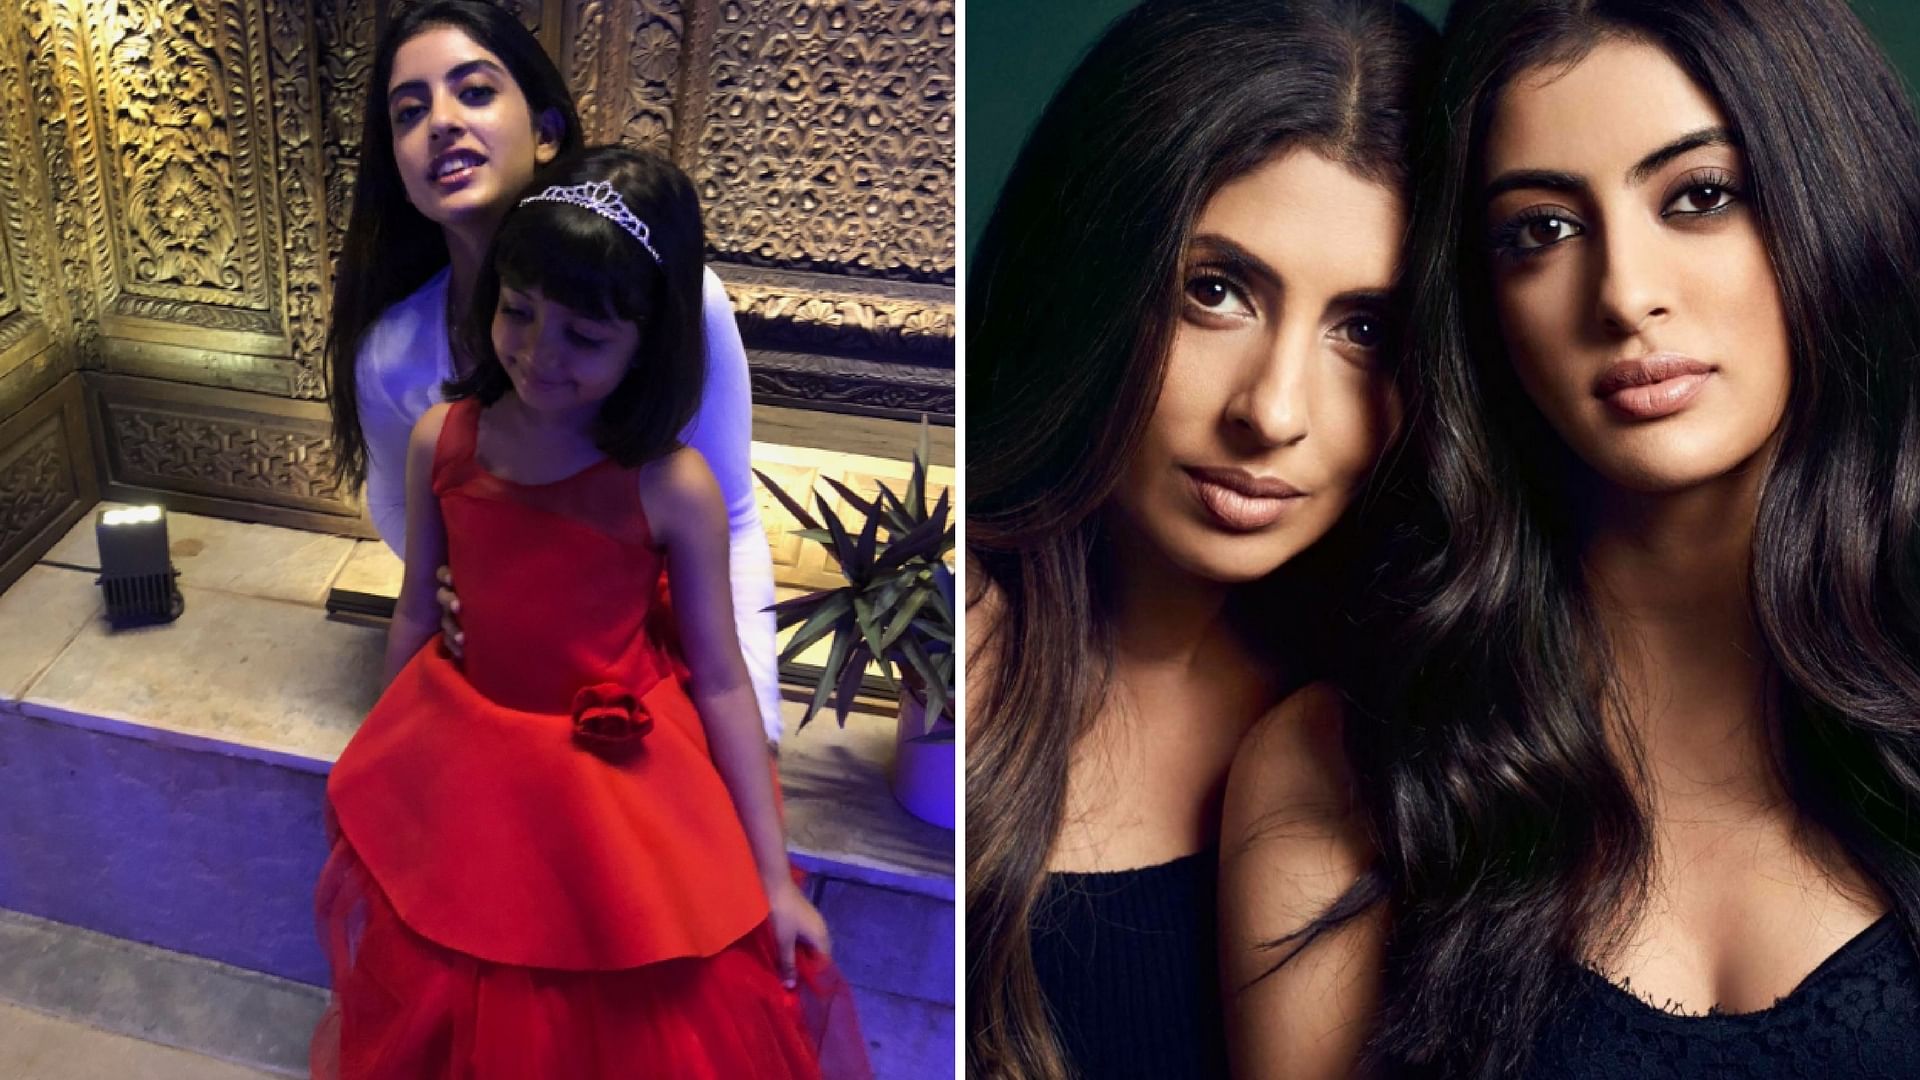 Amitabh Bachchan posted pictures of the women in his family on Twitter on the occasion of Women’s Day.&nbsp;